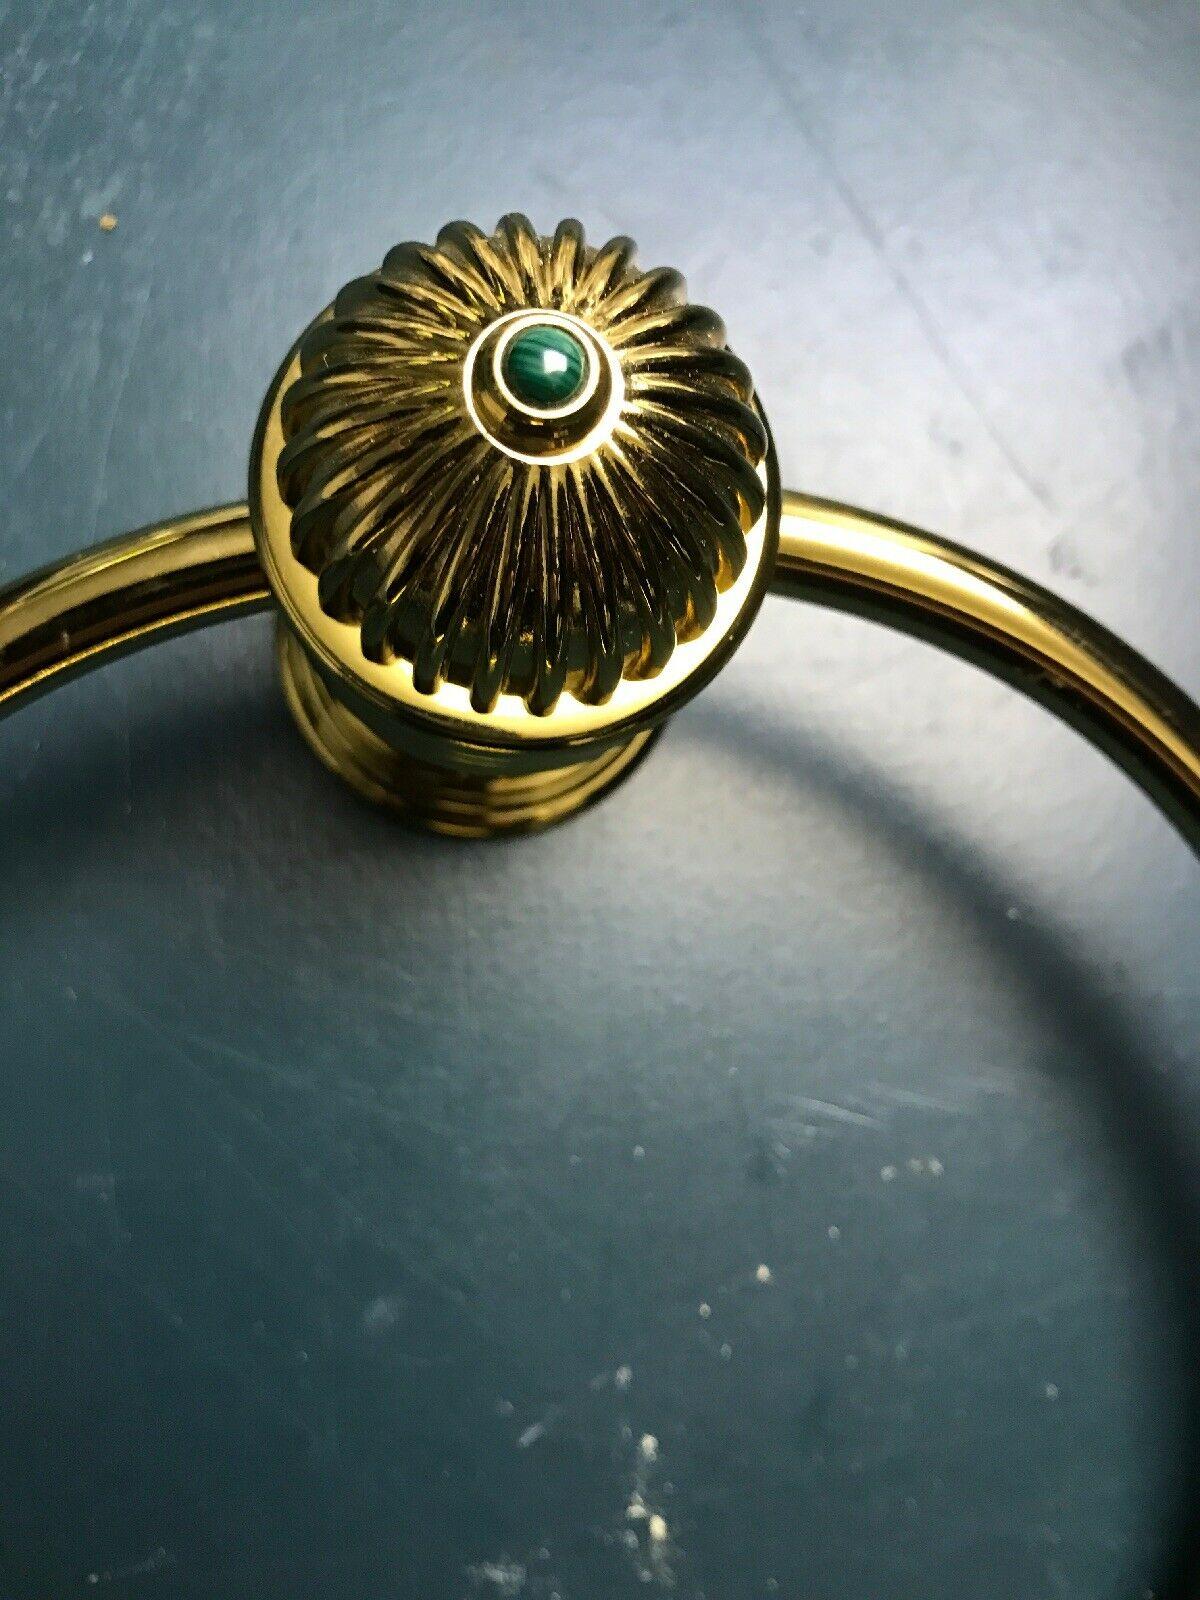 Neoclassical Revival Vintage French Couture Gold and Malachite Towel Ring by Serdaneli Paris For Sale